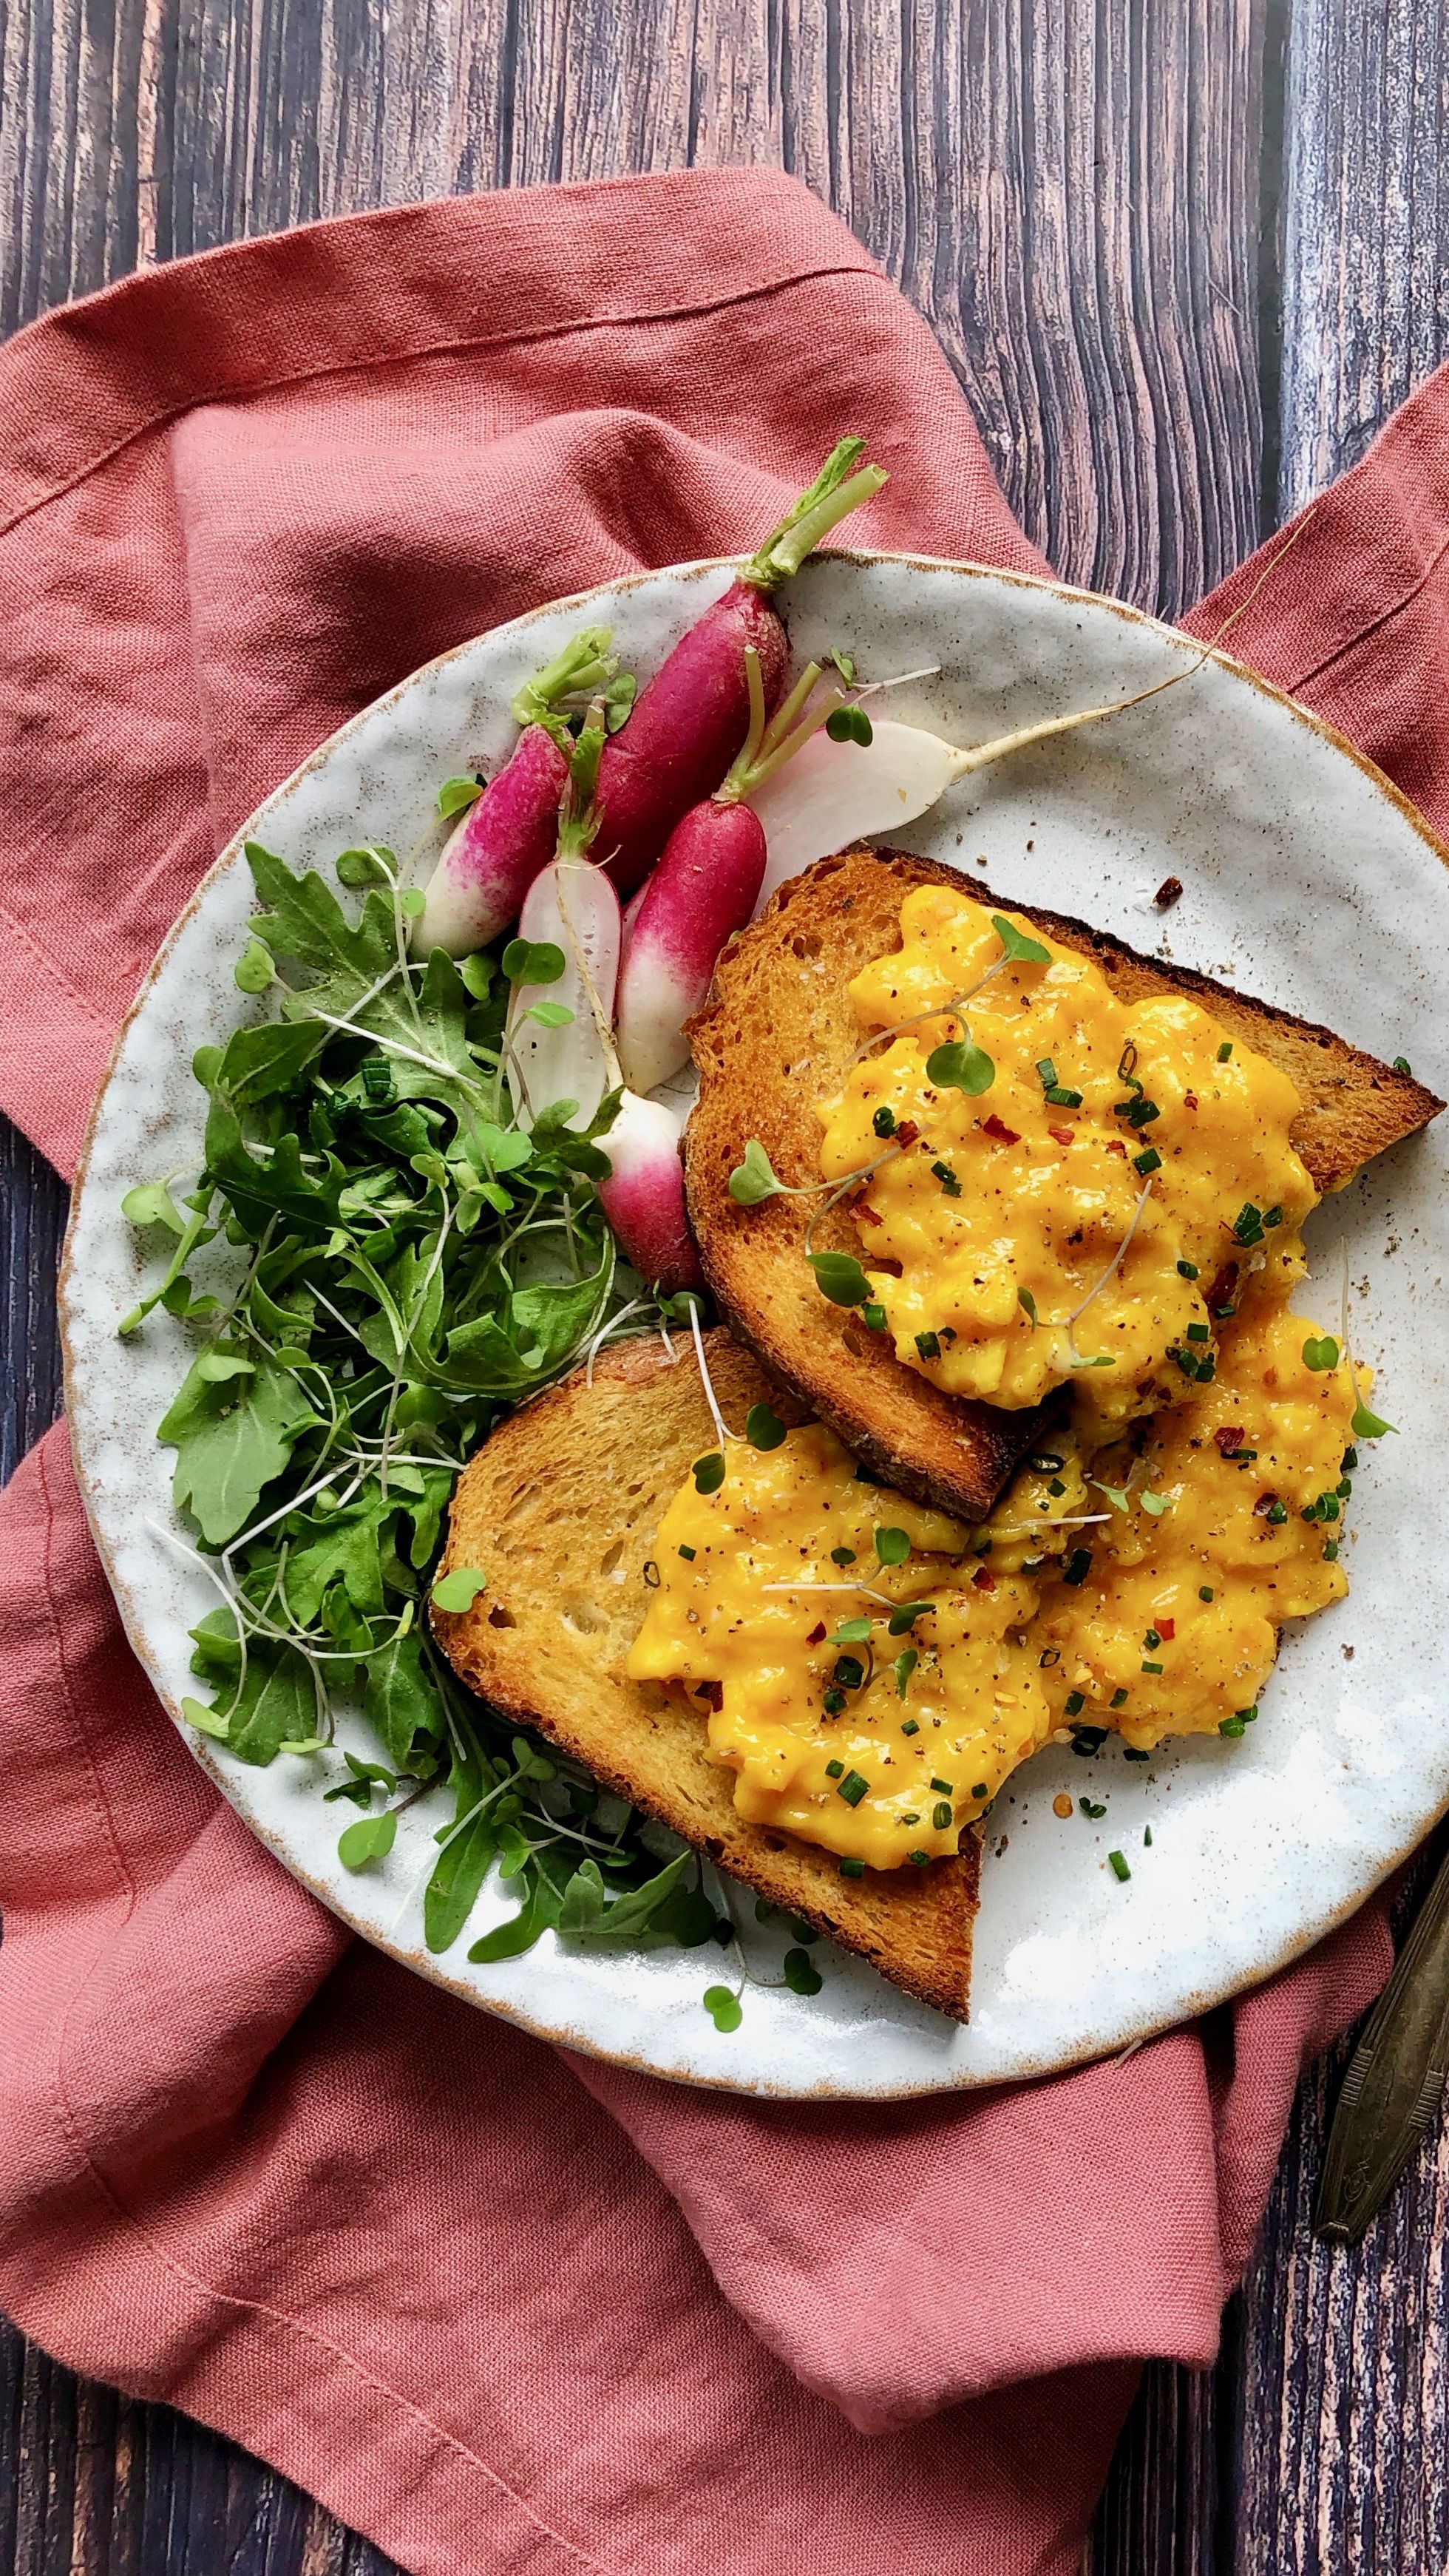 French Scrambled Eggs with Chive-Shallot Butter